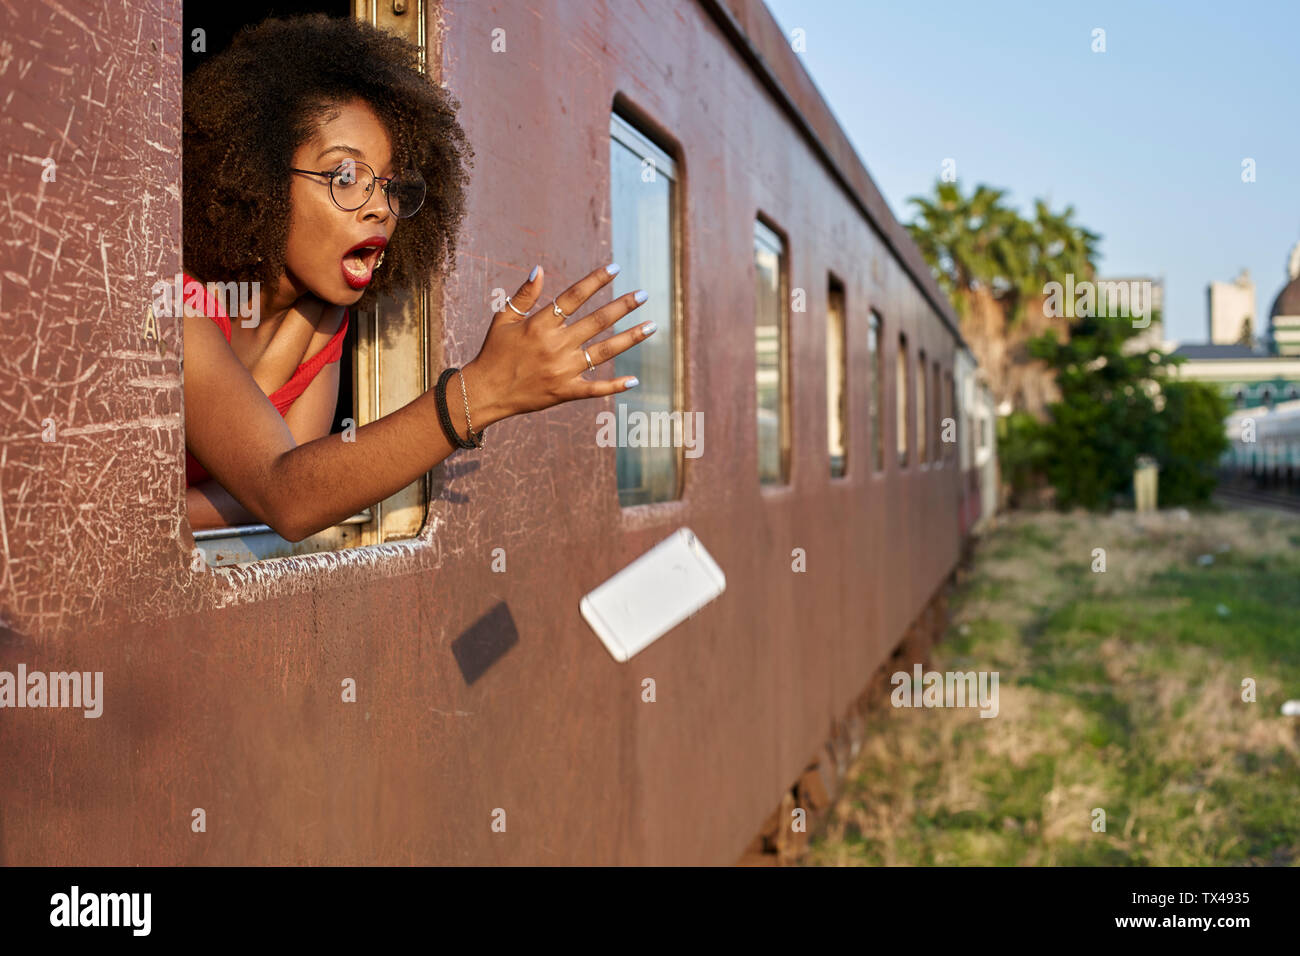 Woman's phone falling out of train window Stock Photo